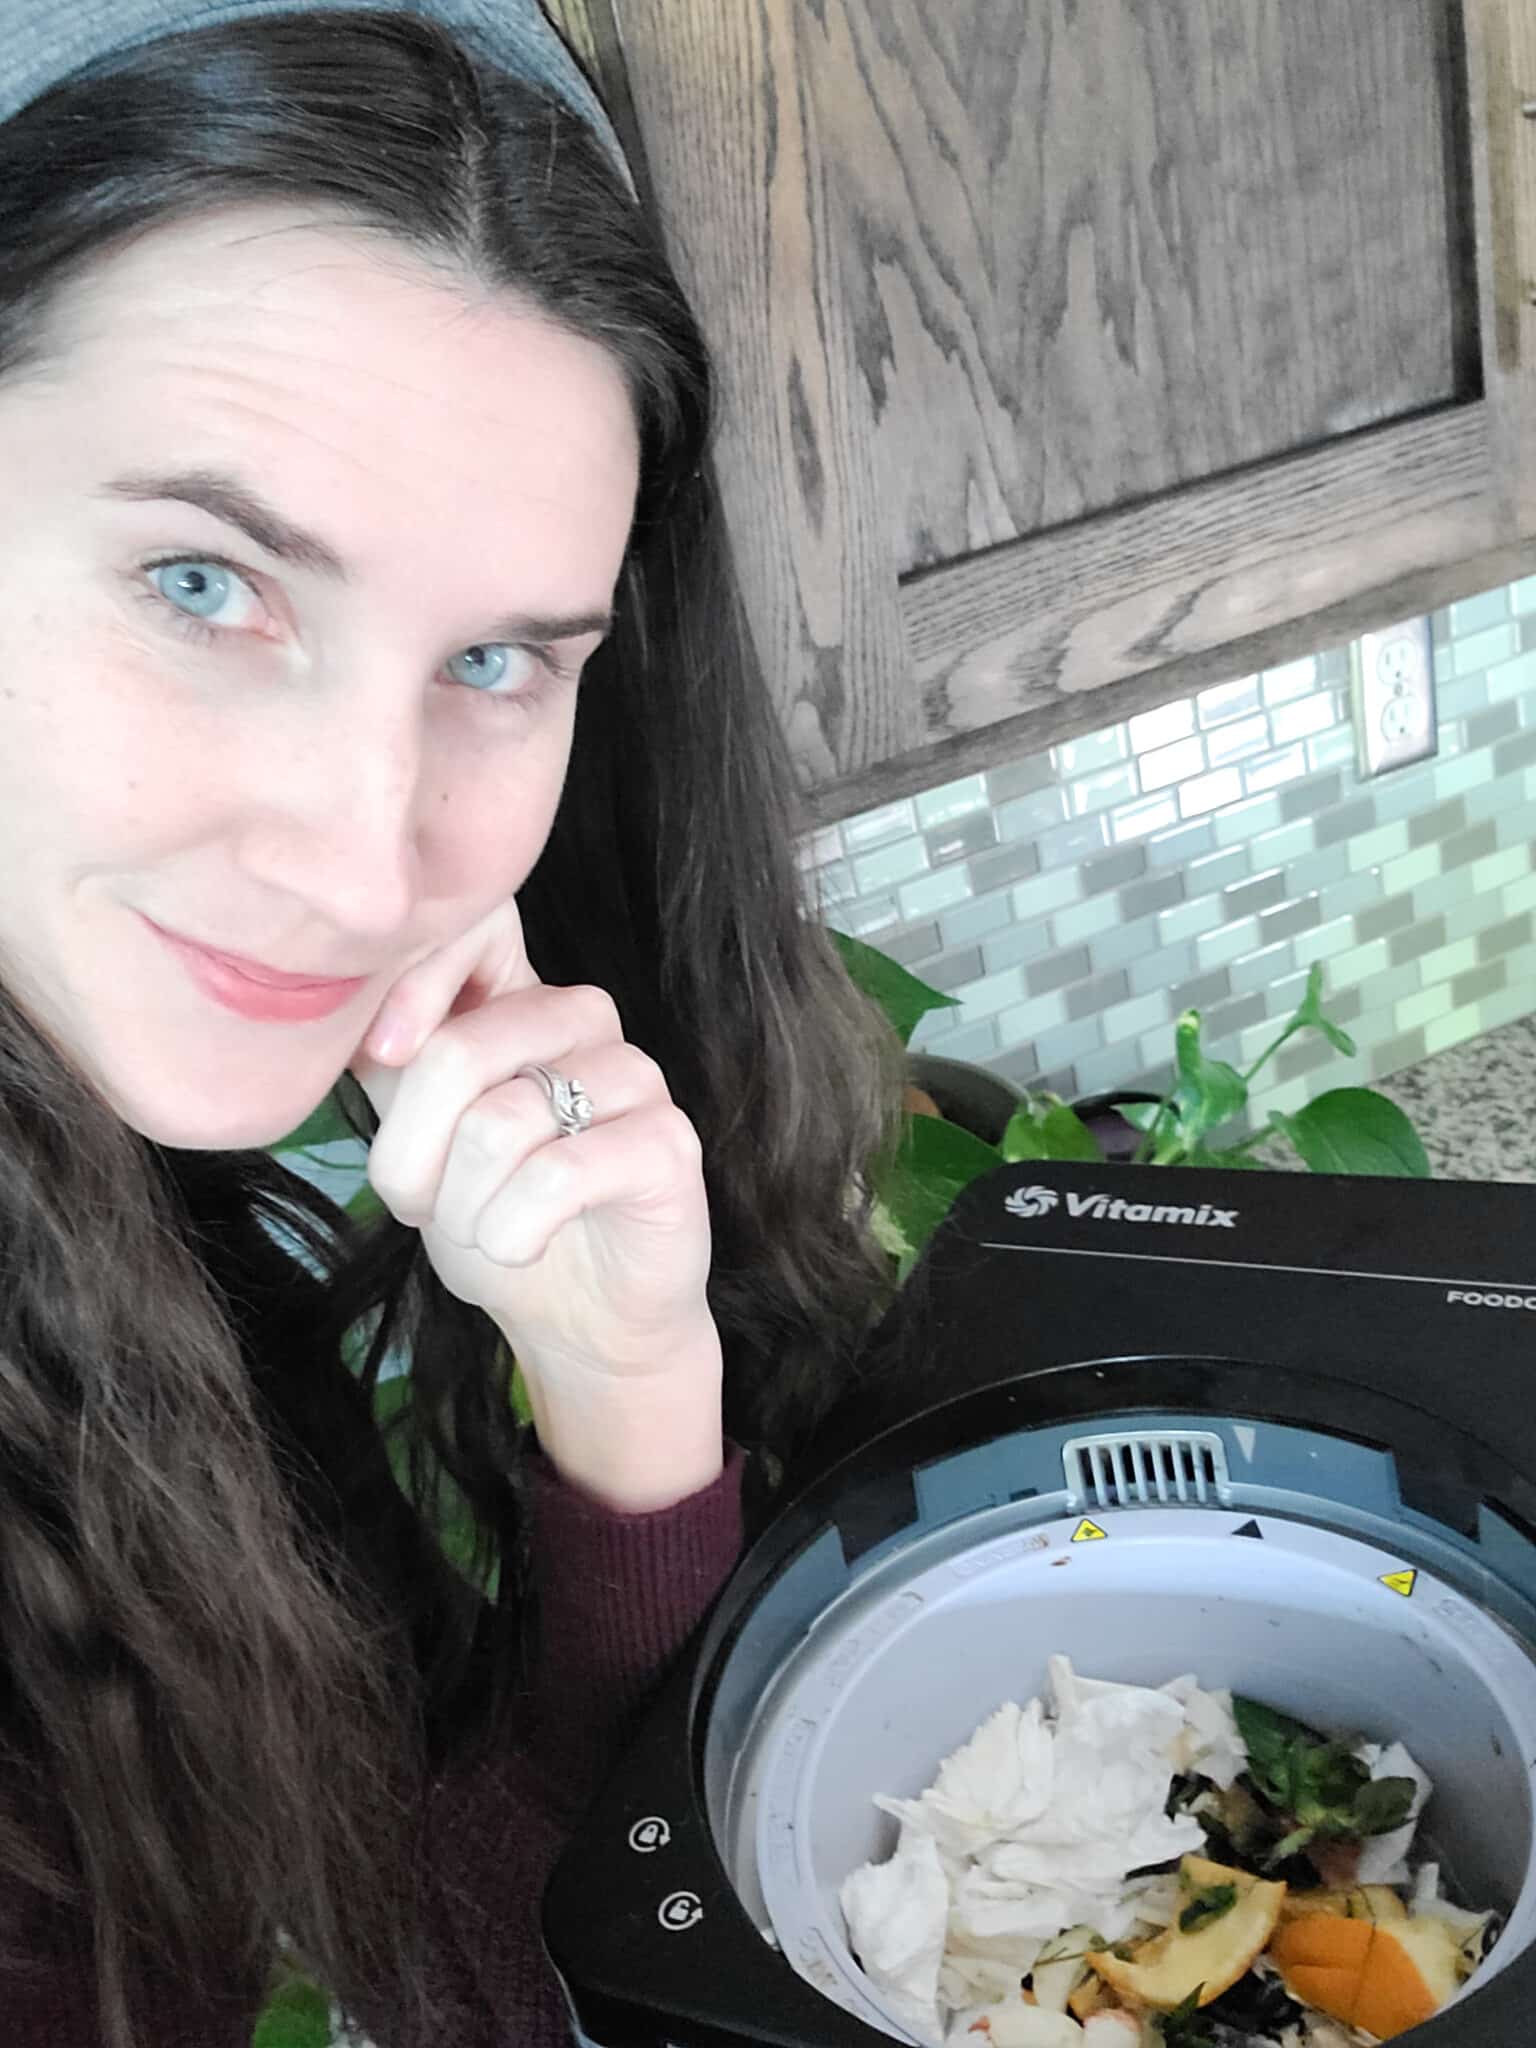 woman looking at her Vitamix Foodcycler (aka electric composter) full of food scraps